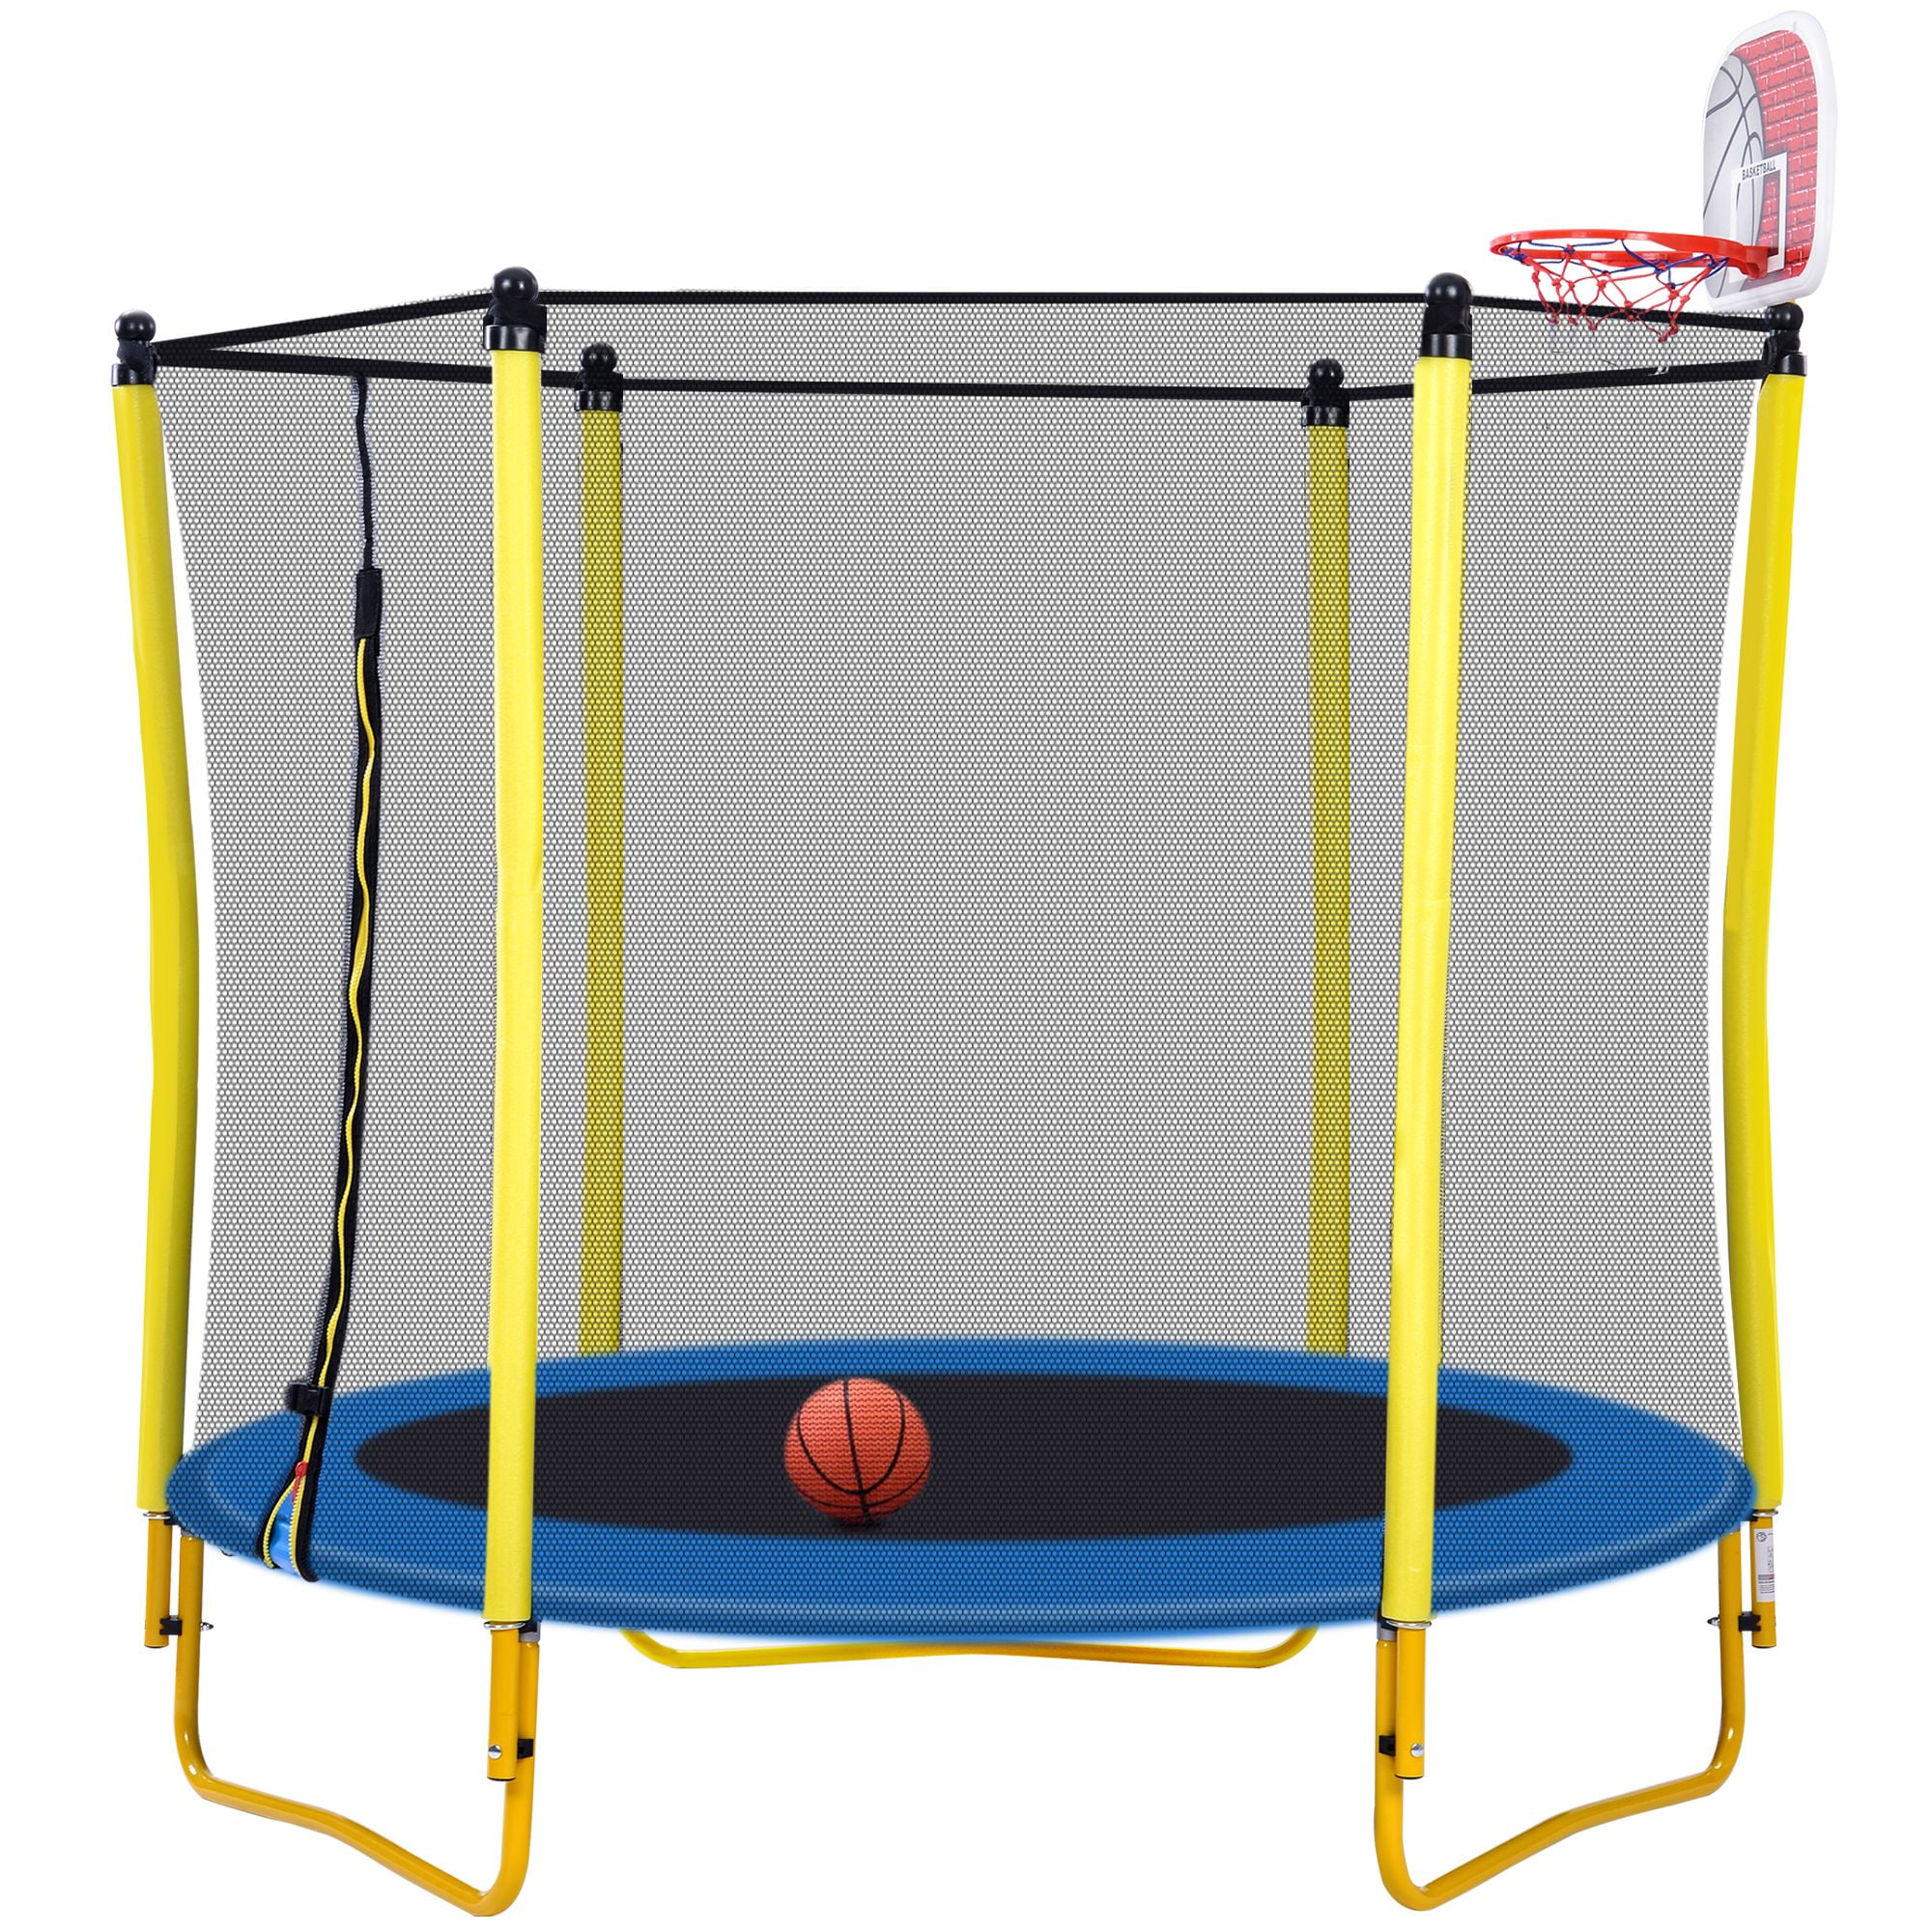 moobody 5.5FT Trampoline for Kids - 65" Outdoor & Indoor Mini Toddler Trampoline with Enclosure, Basketball Hoop and Ball Included